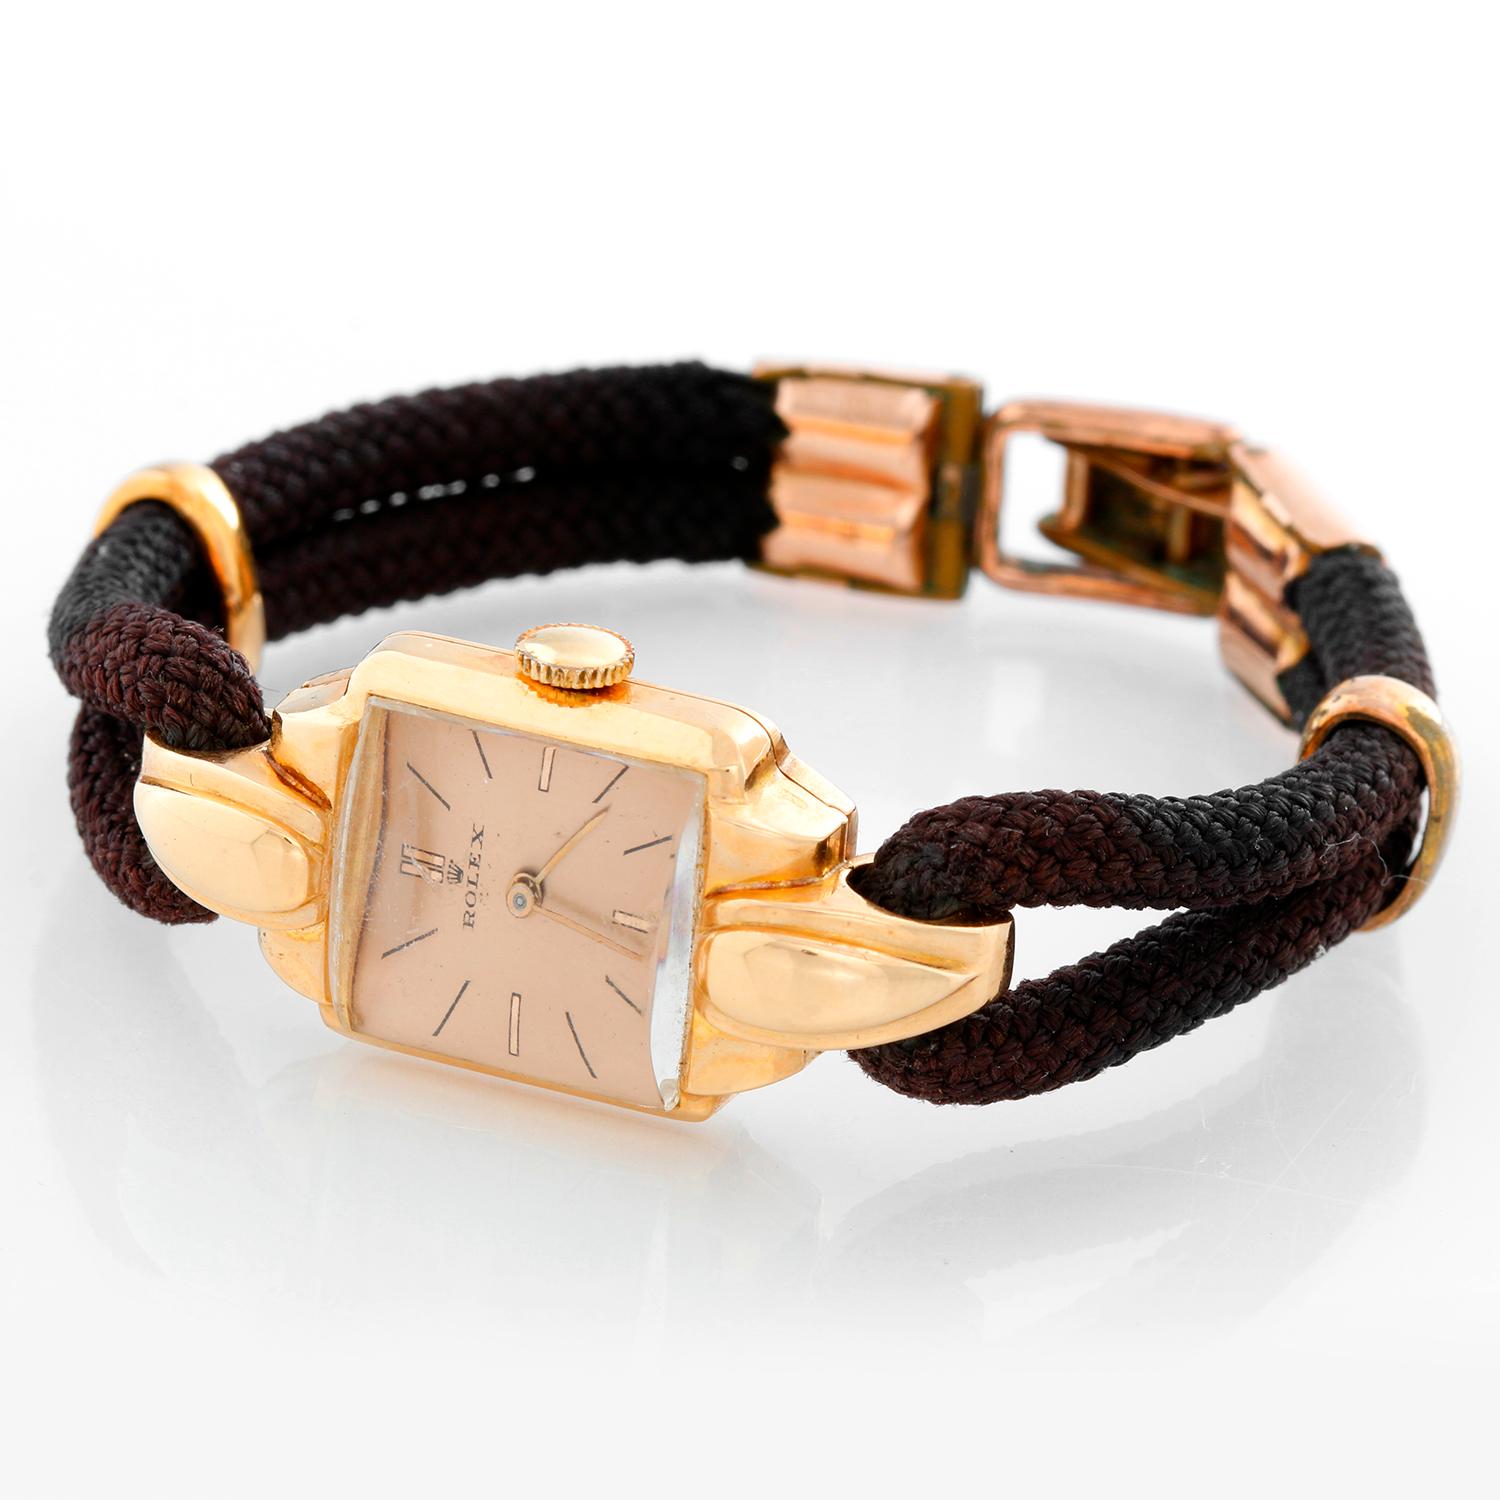 Rolex Vintage Rose Gold Ladies Dress Watch - Manual winding . Rose gold case ( 17 x 35 mm ) . Salmon colored dial with stick hour markers . Double rope strap; will fit up to a 6 inch wrist . Pre-owned with custom box. Circa 1940-'s-1950's .